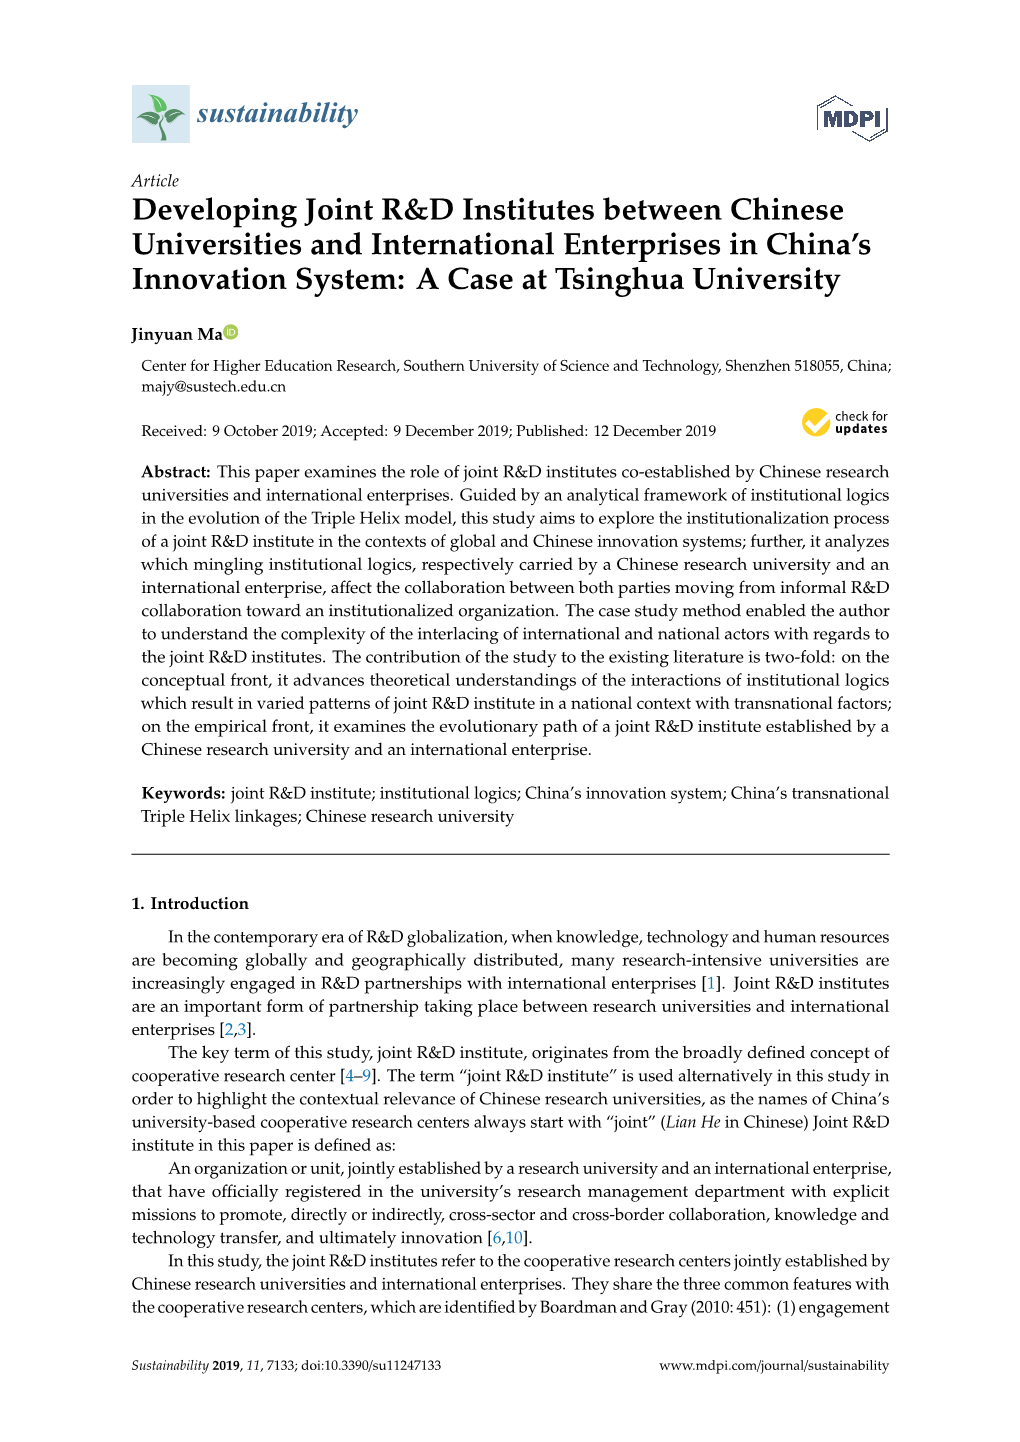 Developing Joint R&D Institutes Between Chinese Universities and International Enterprises in China's Innovation System